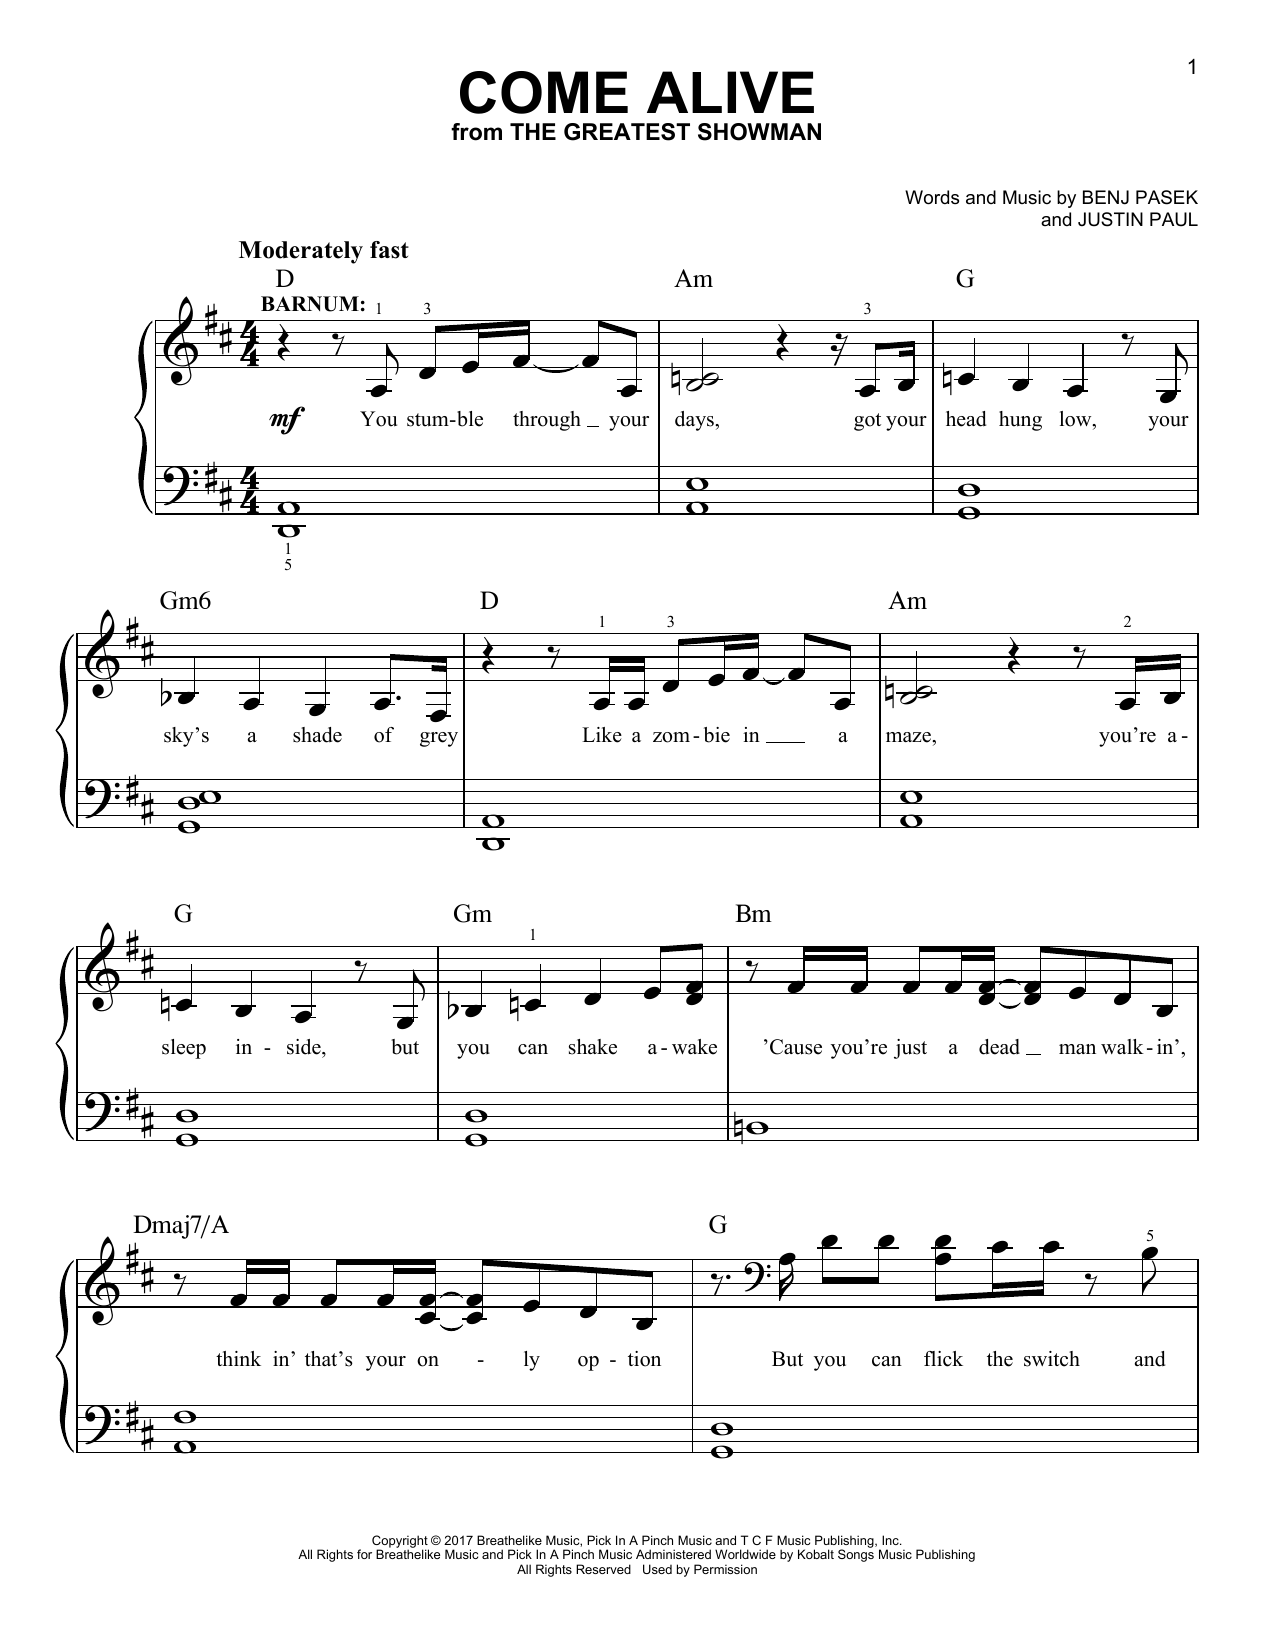 Download Pasek & Paul Come Alive (from The Greatest Showman) Sheet Music